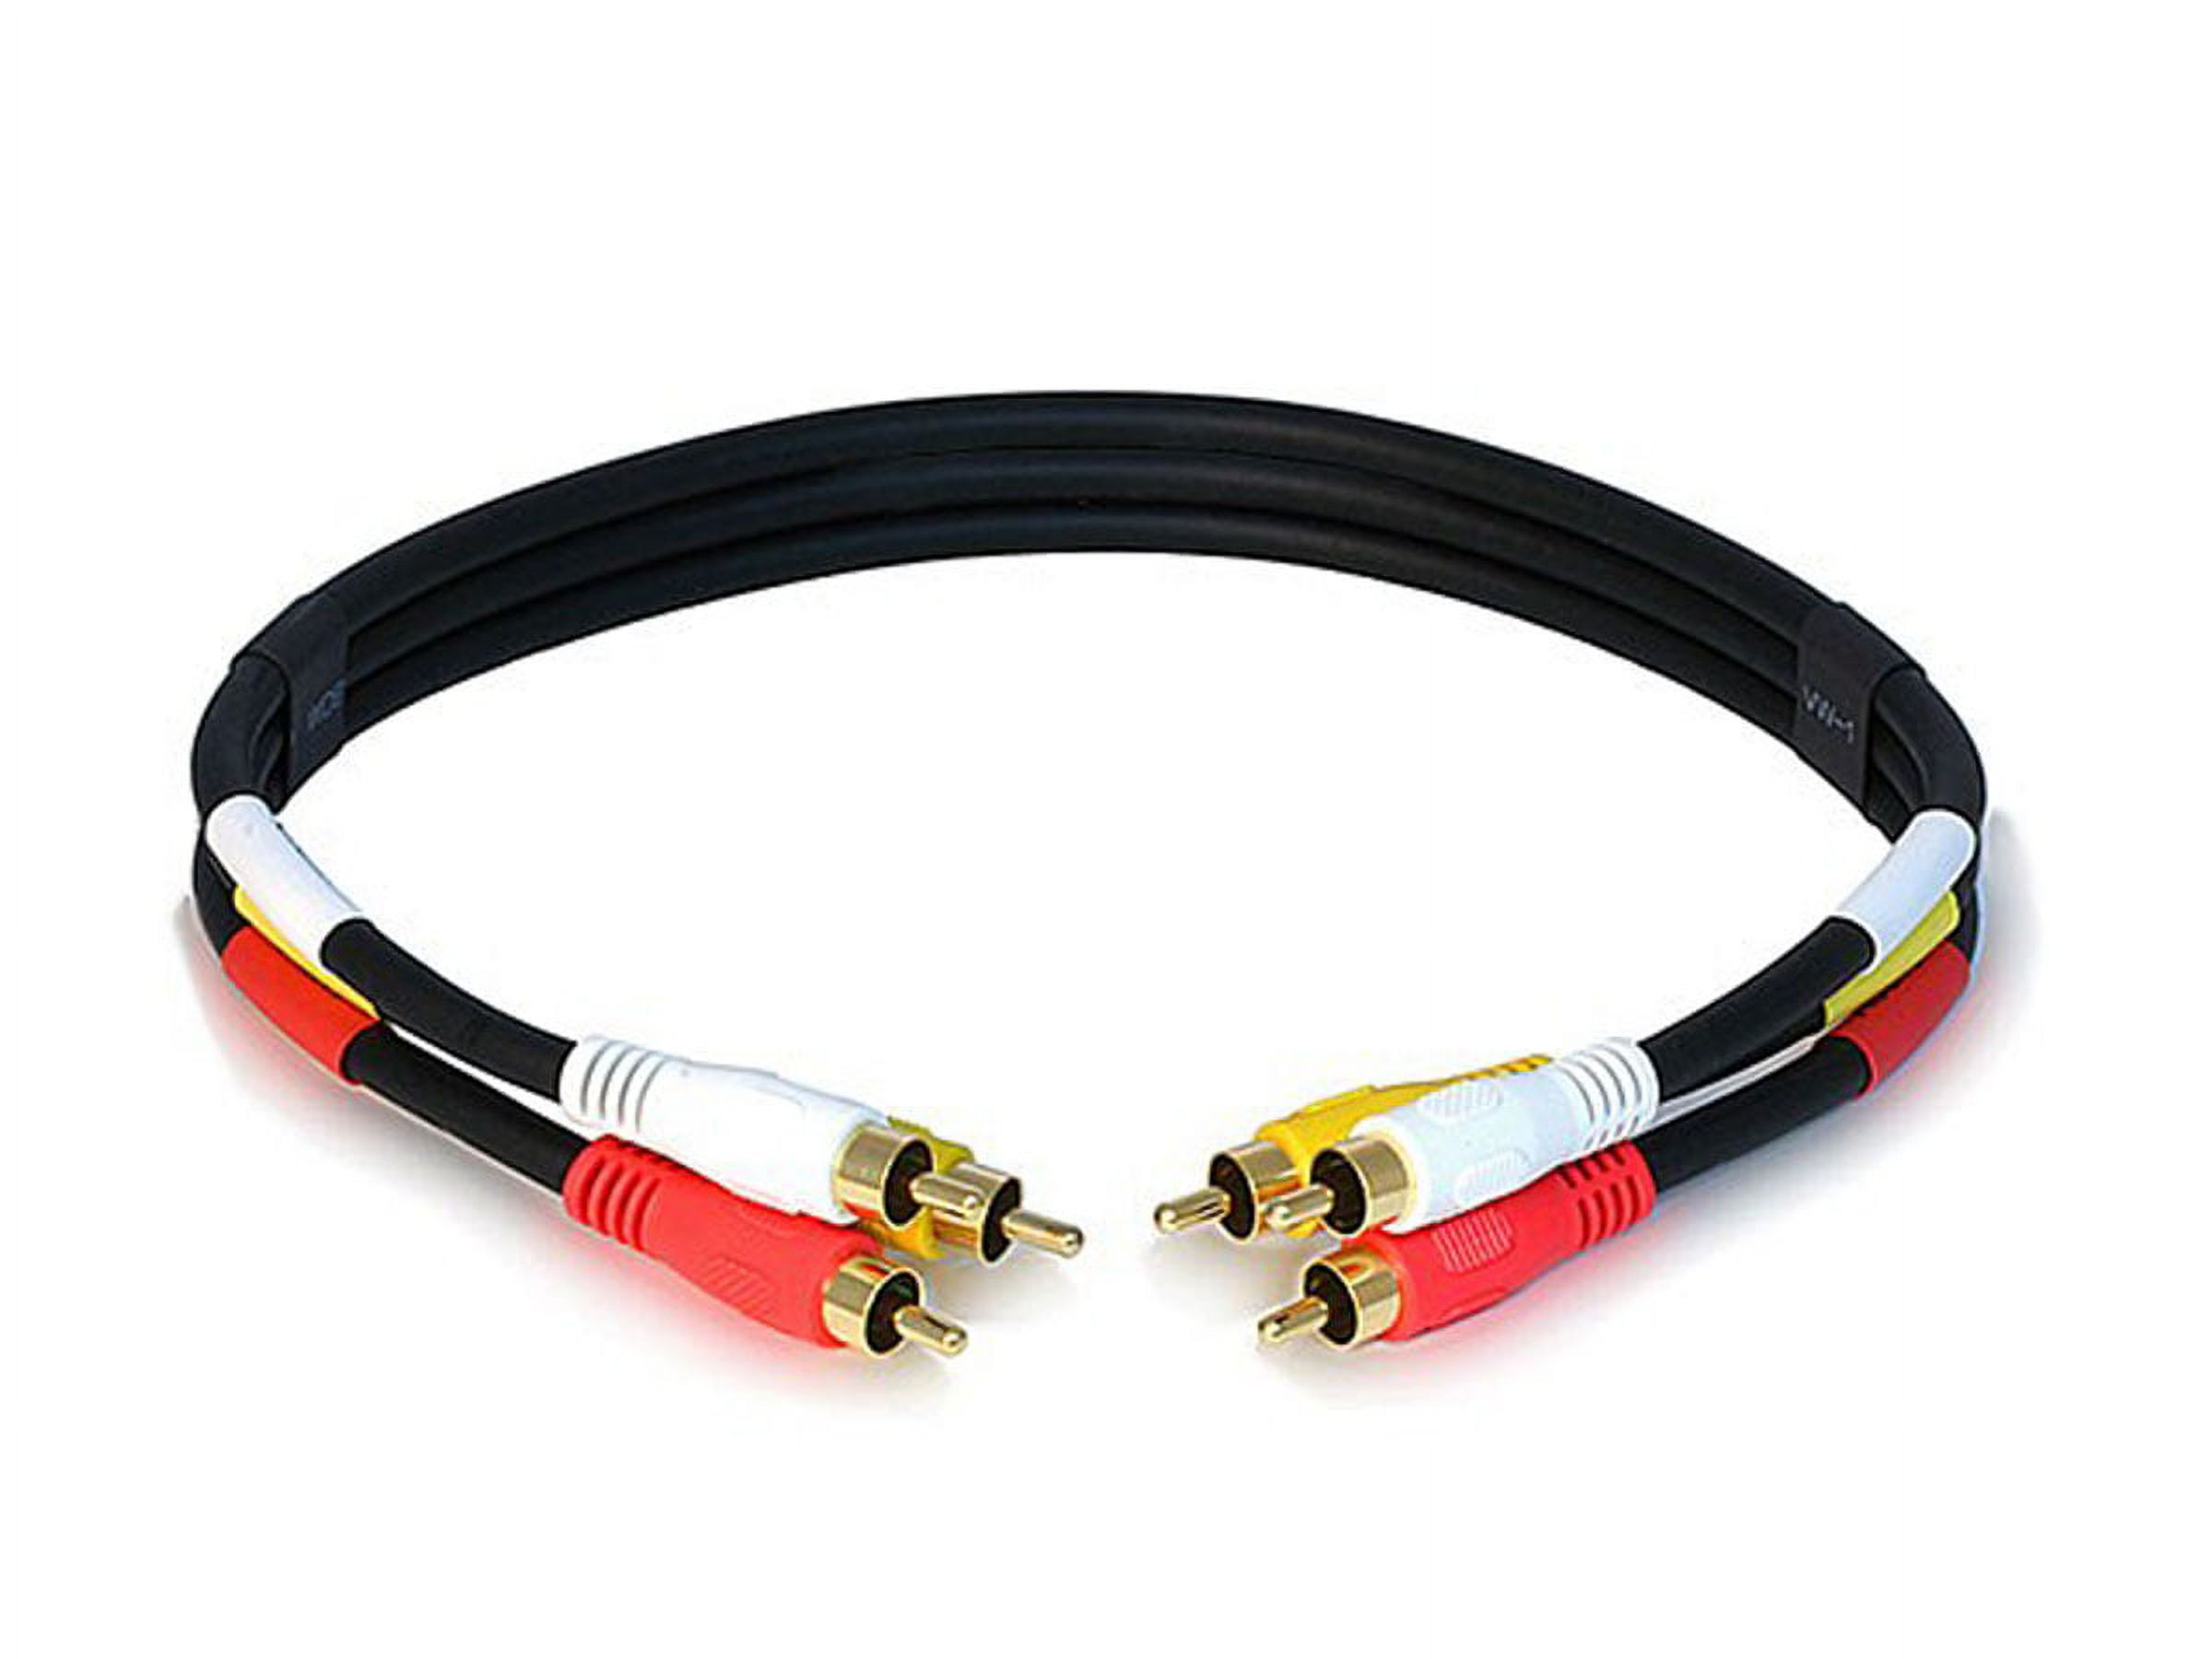 Monoprice Video Cable - 1.5 Feet - Black | Triple RCA Stereo Video Dubbing Composite Cable, Gold Plated Connectors - image 1 of 2